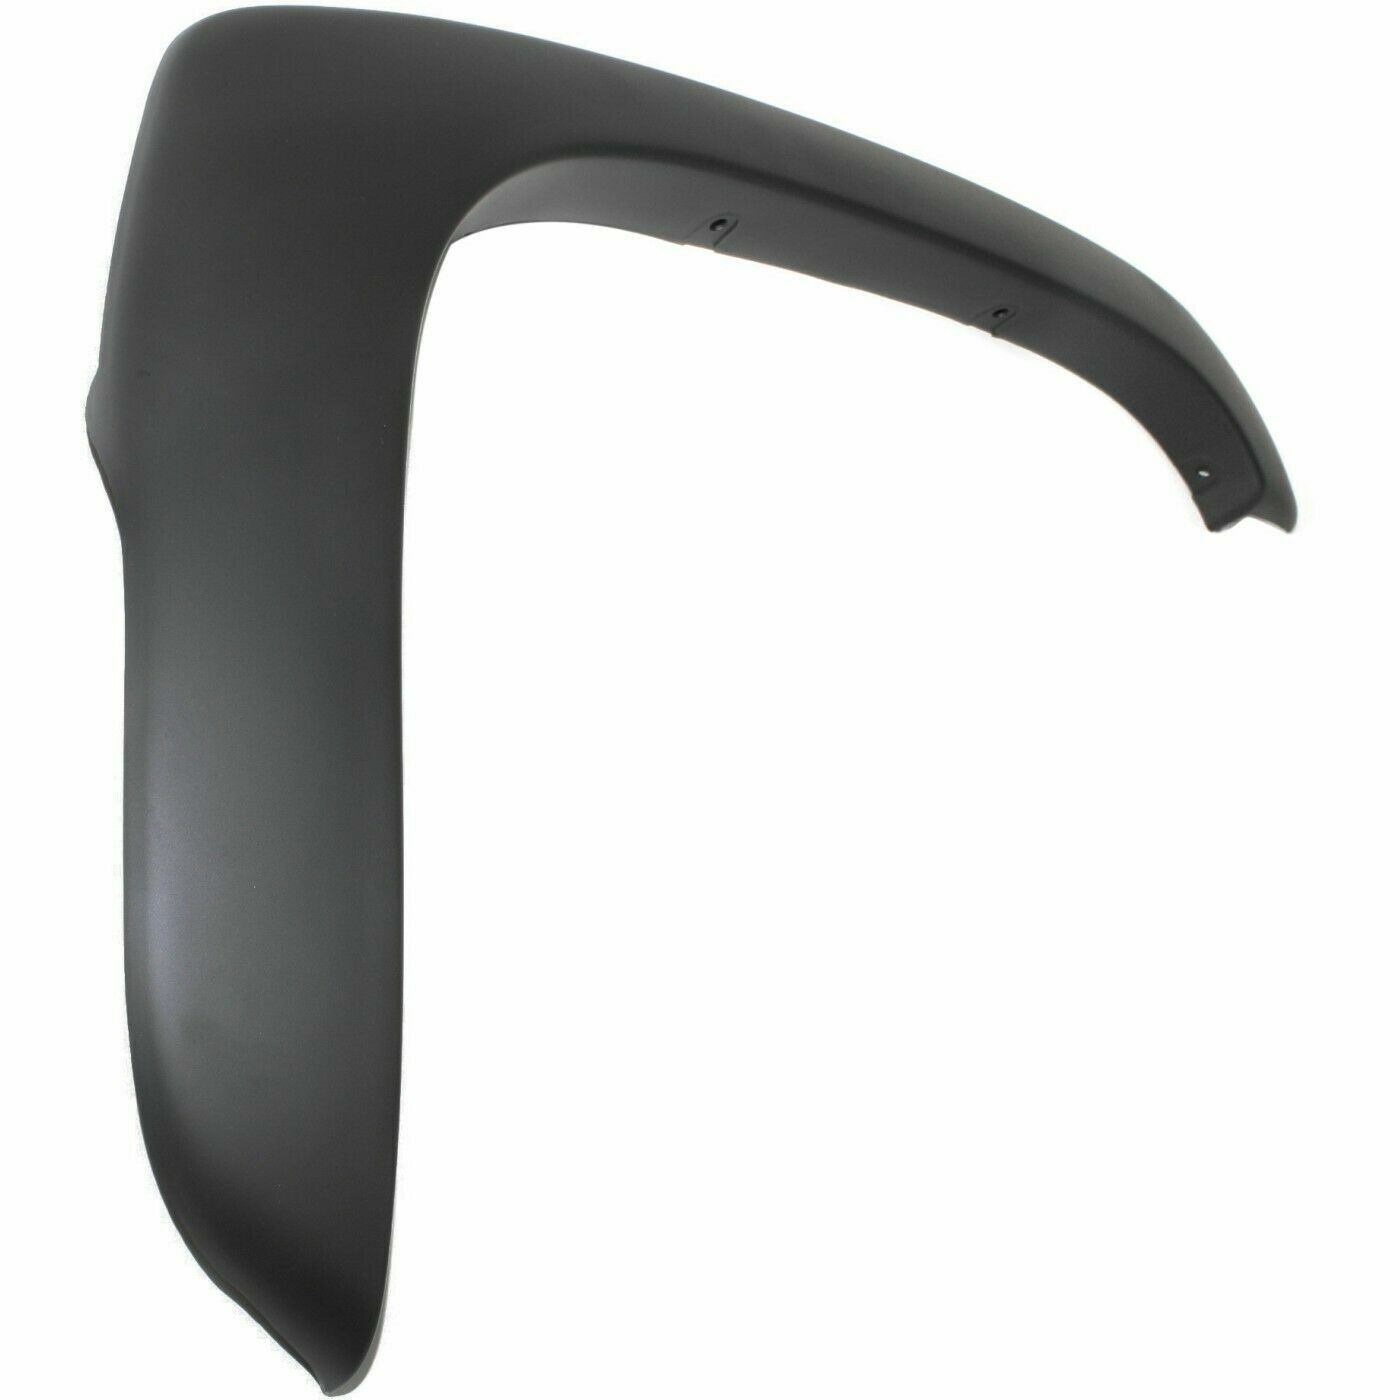 1999-2007 CHEVY SILVERADO; Right Fender flare; /PTD Painted to Match